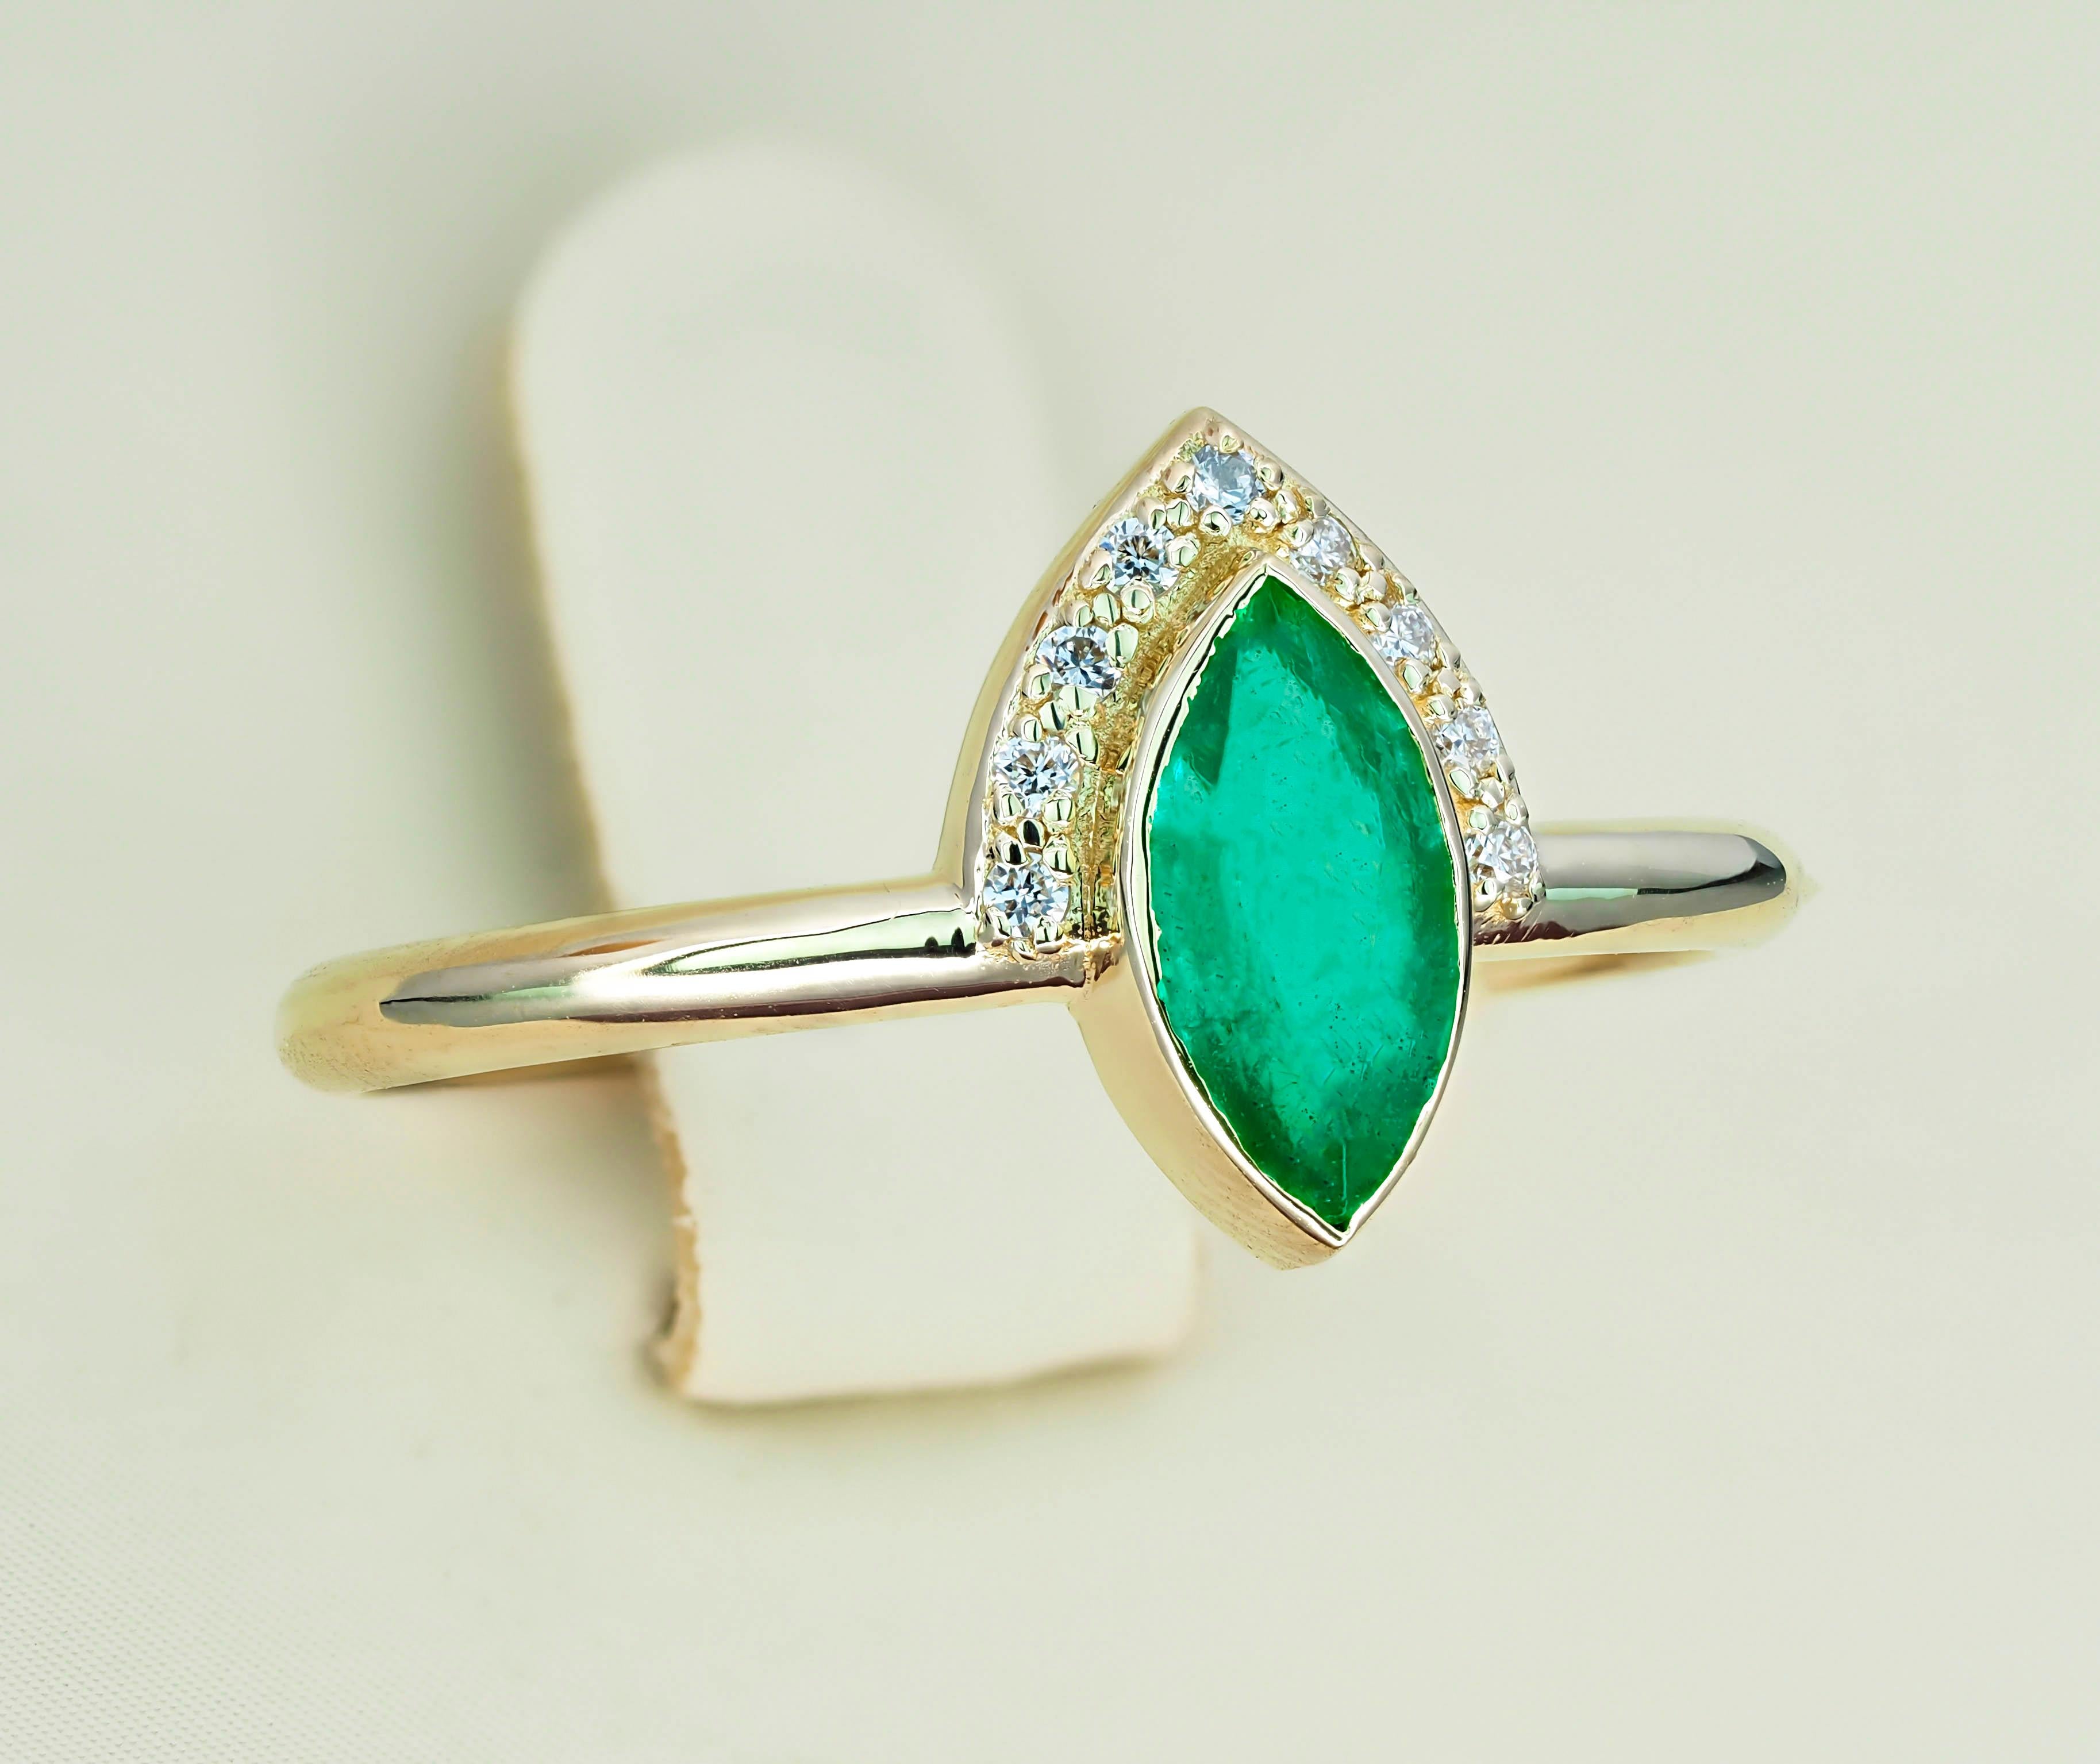 For Sale:  14 K Gold Ring with Marquise Cut Emerald and Diamonds 4